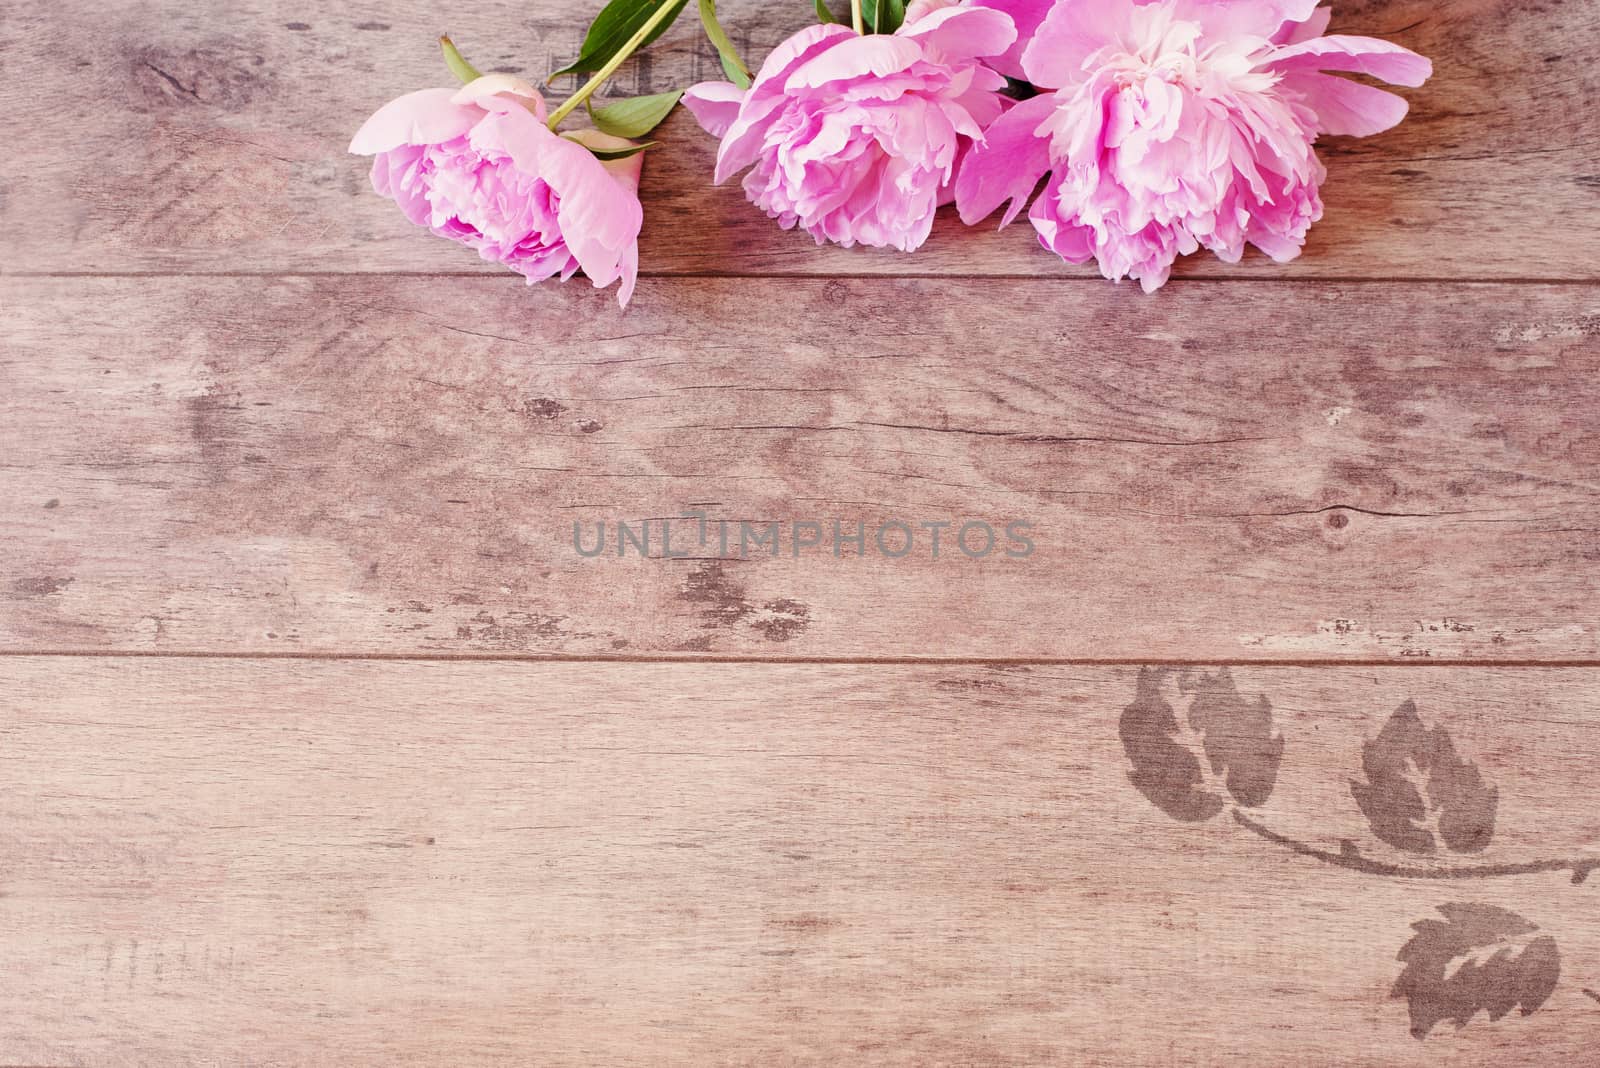 Floral frame with pink peonies on wooden background. Styled marketing photography. Copy space. Wedding, gift card, valentine's day or mothers day background